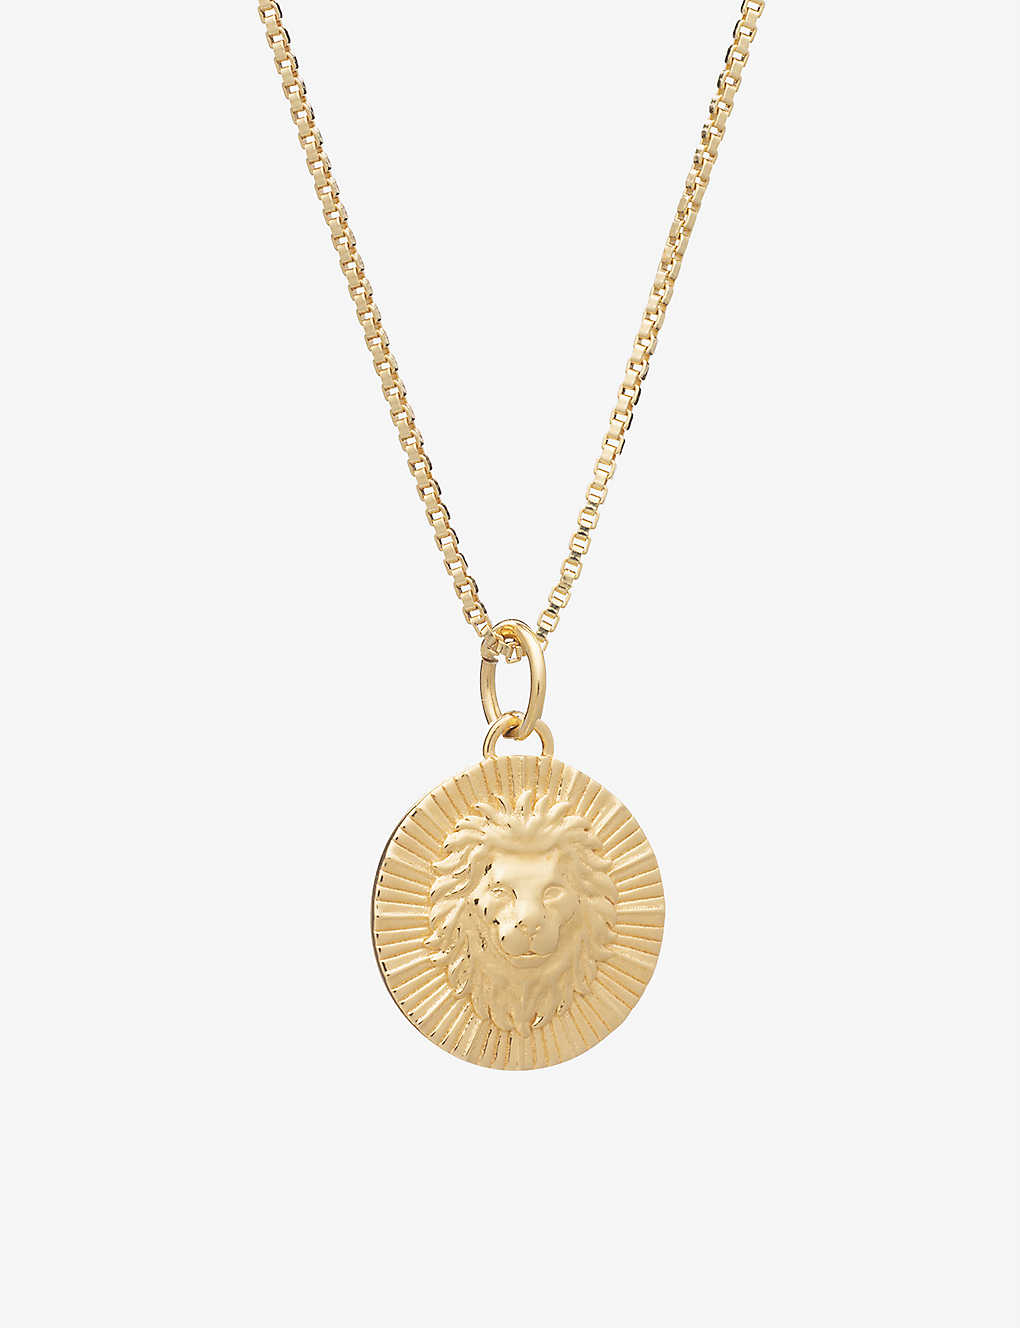 Rachel Jackson Zodiac Coin Leo Short 22ct Gold-plated Sterling Silver Necklace In 22 Carat Gold Plated